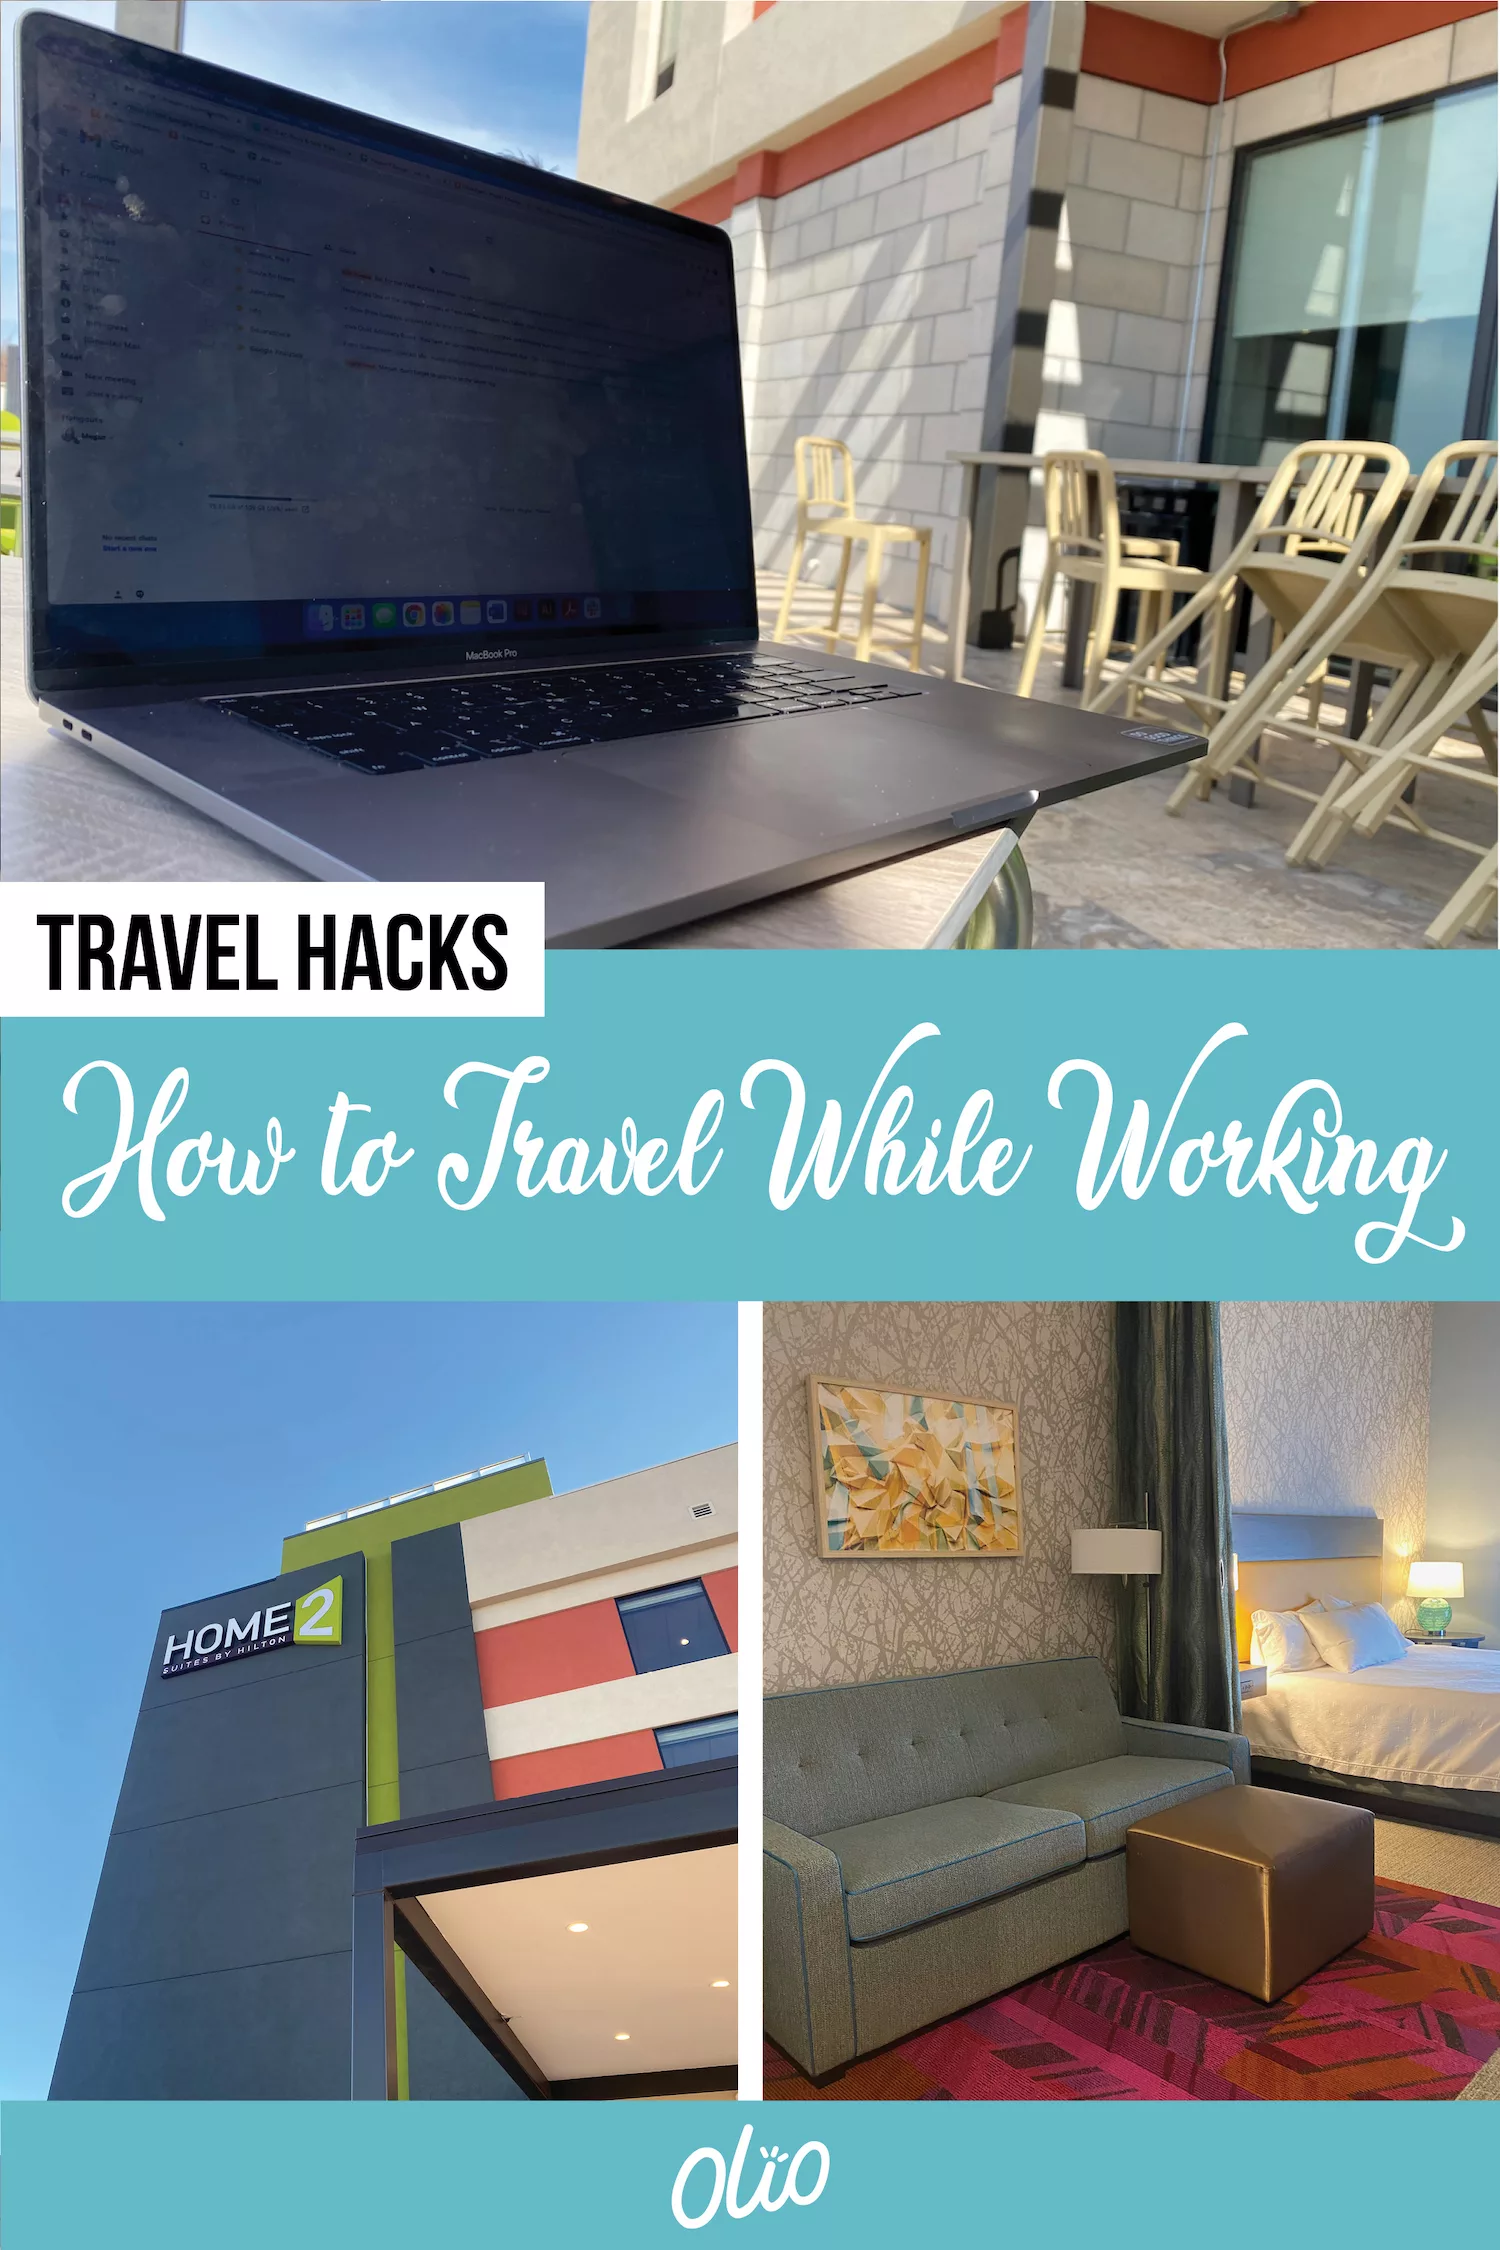 There are lots of ways to take advantage of working remotely while traveling! Discover how you can make the most out of your remote position while getting a change of scenery and exploring a new city with these handy travel tips!